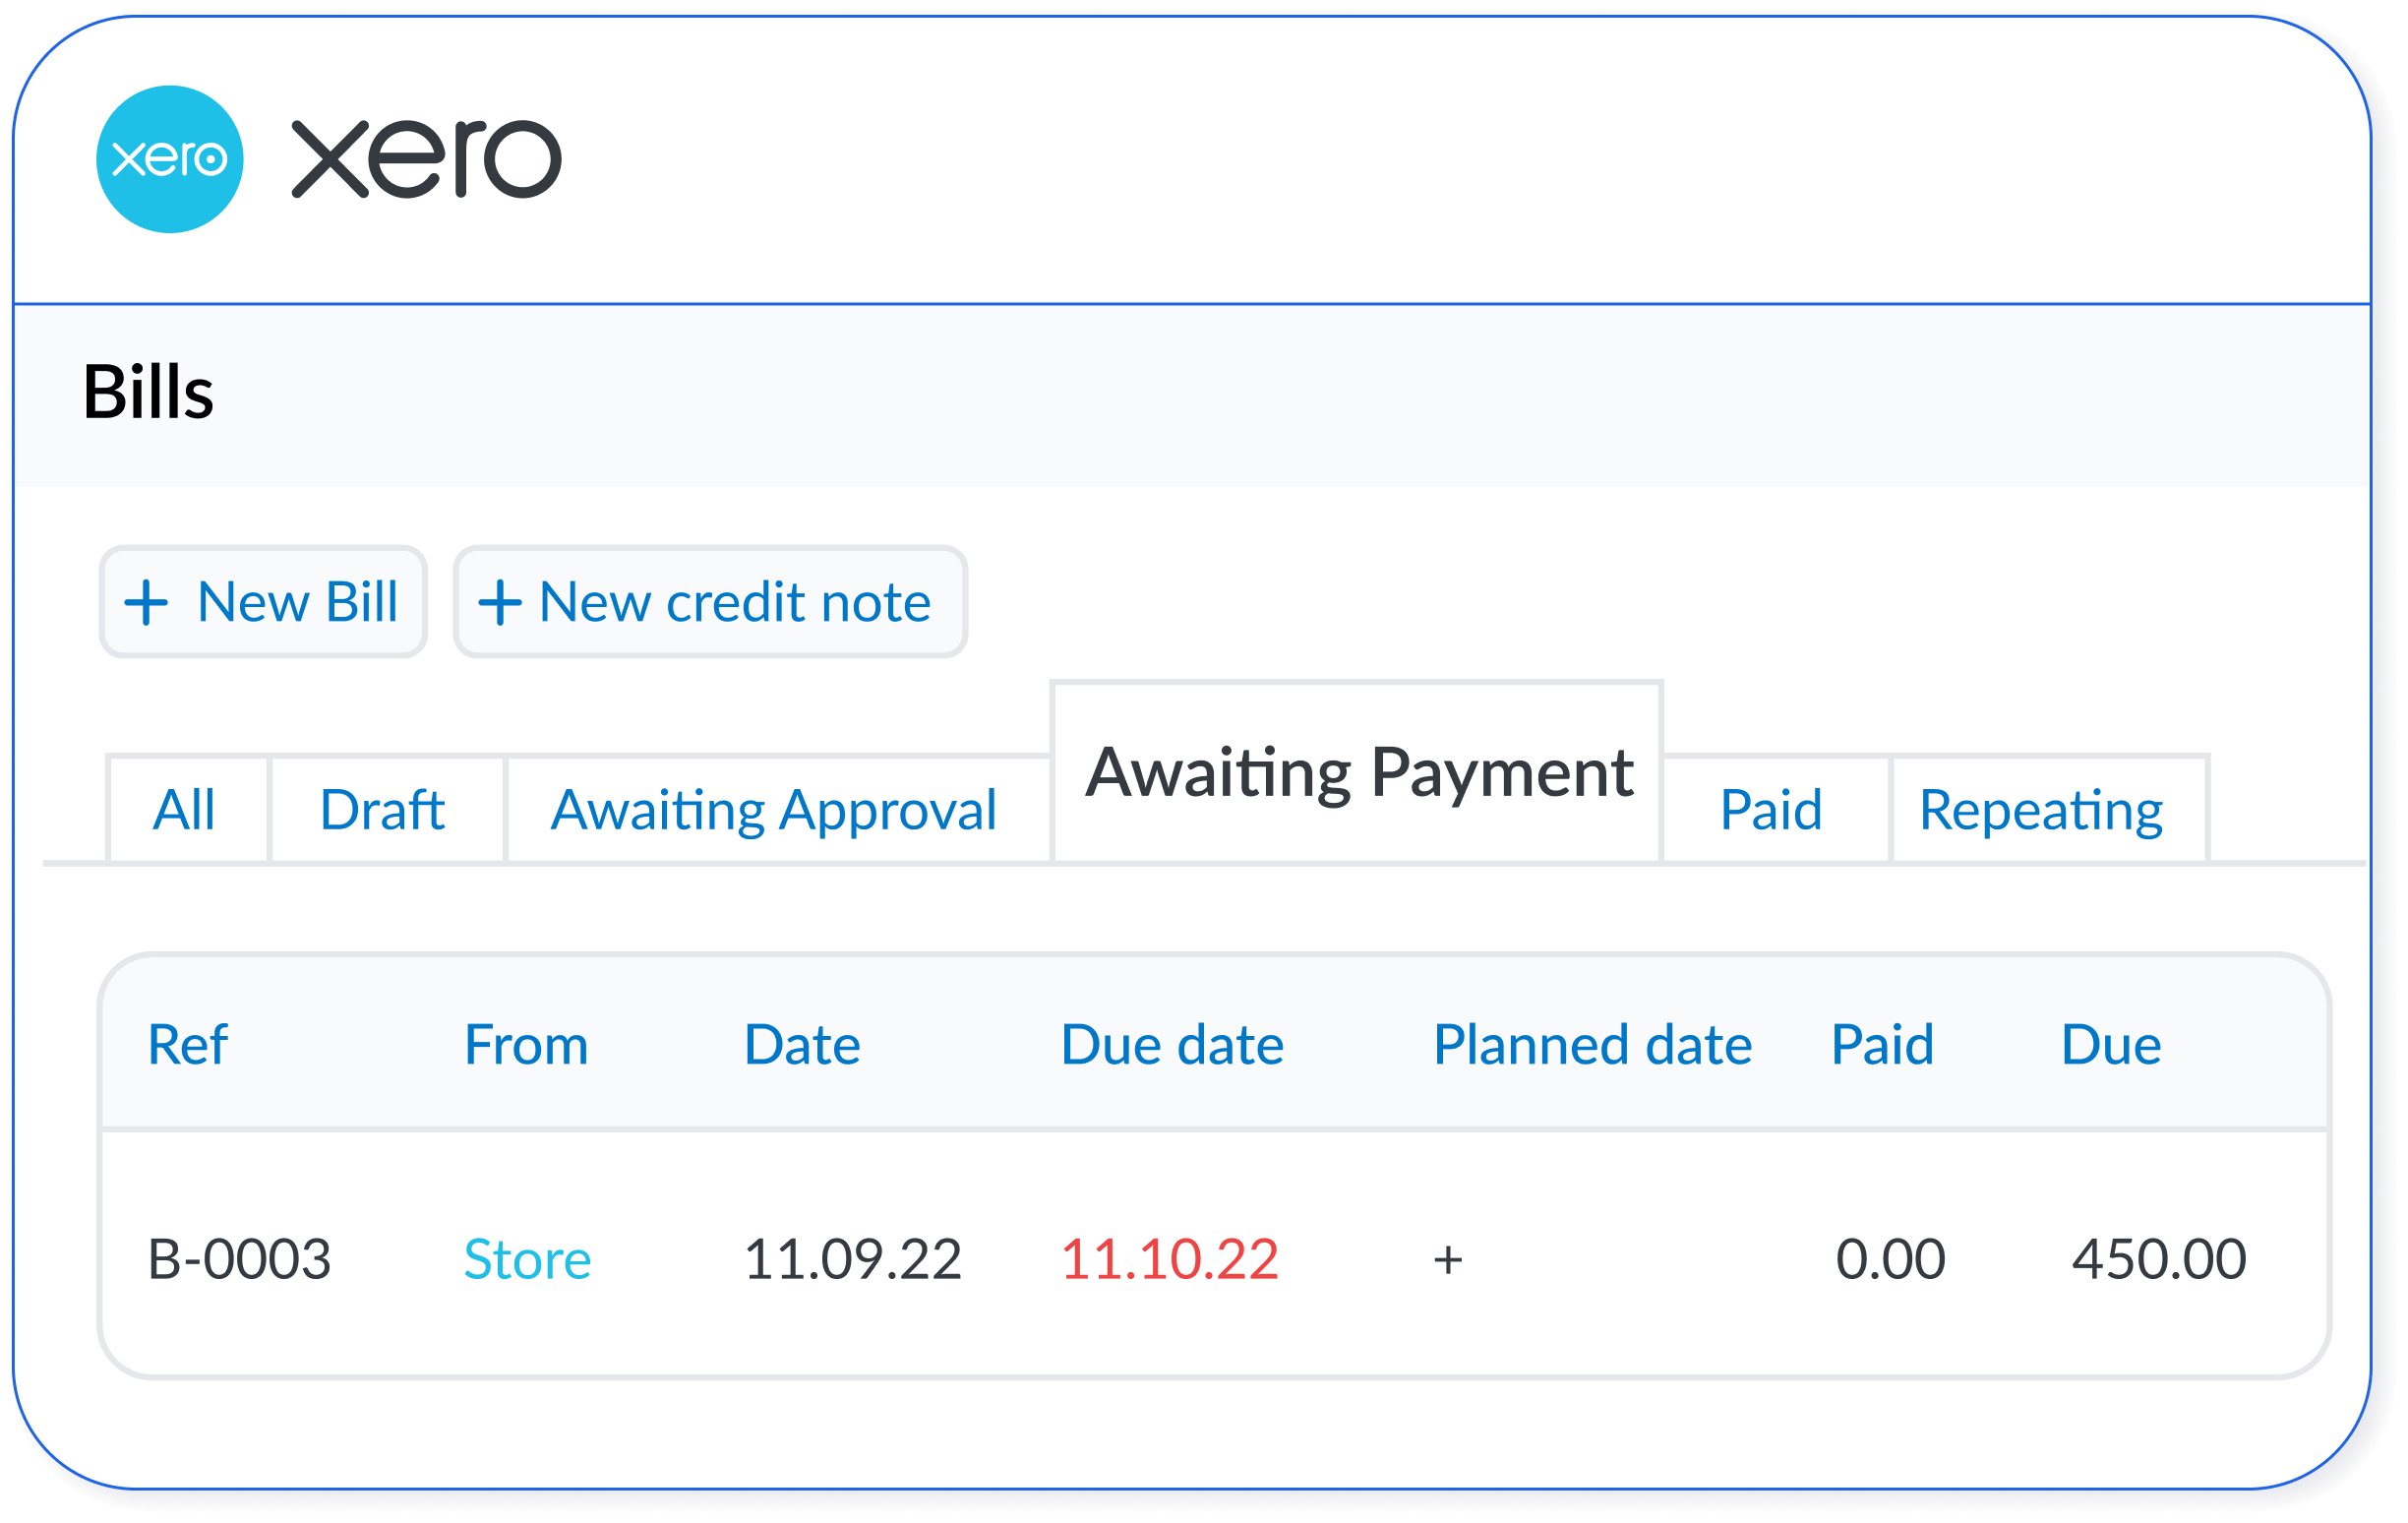 Only fully authorized transactions will be registered in xero